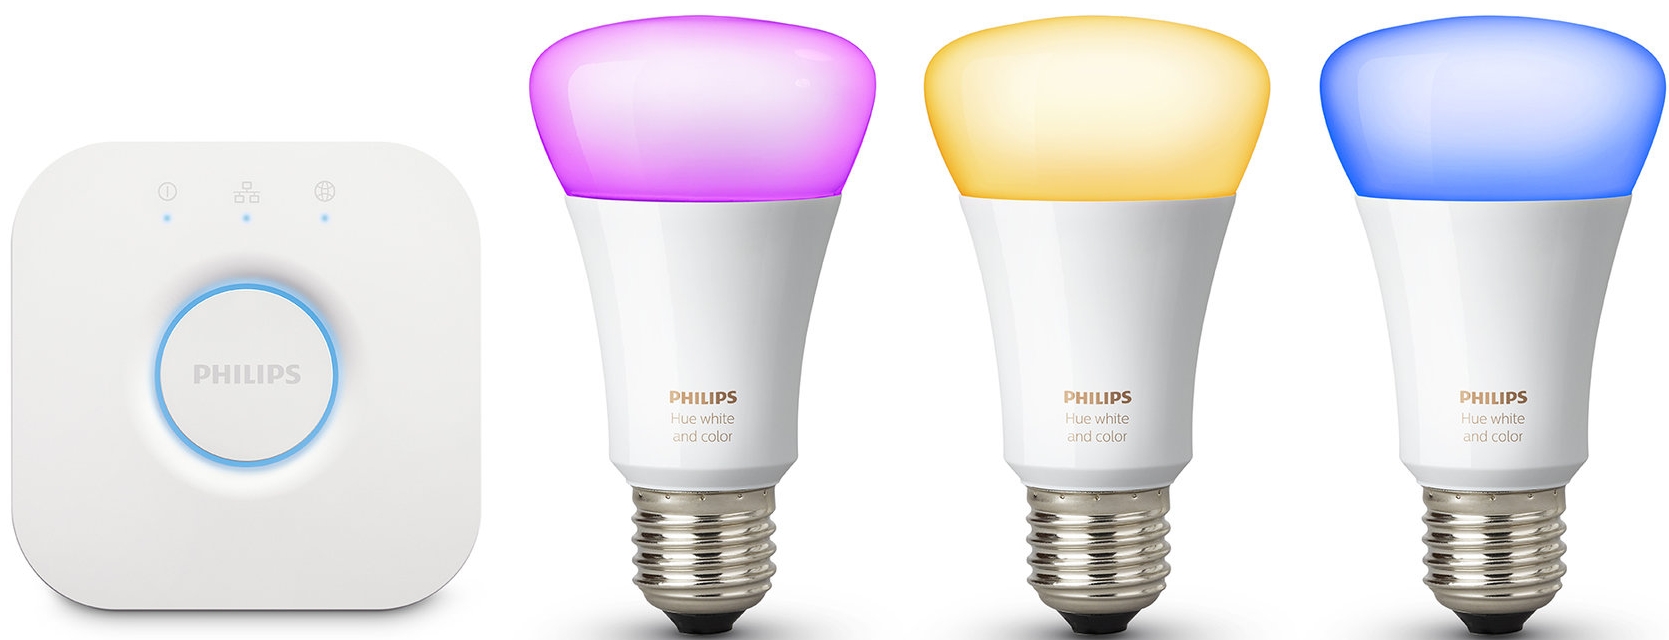 Philips Hue White and Color Ambiance A19 Starter Kit at Bed Bath & Beyond, $199.99